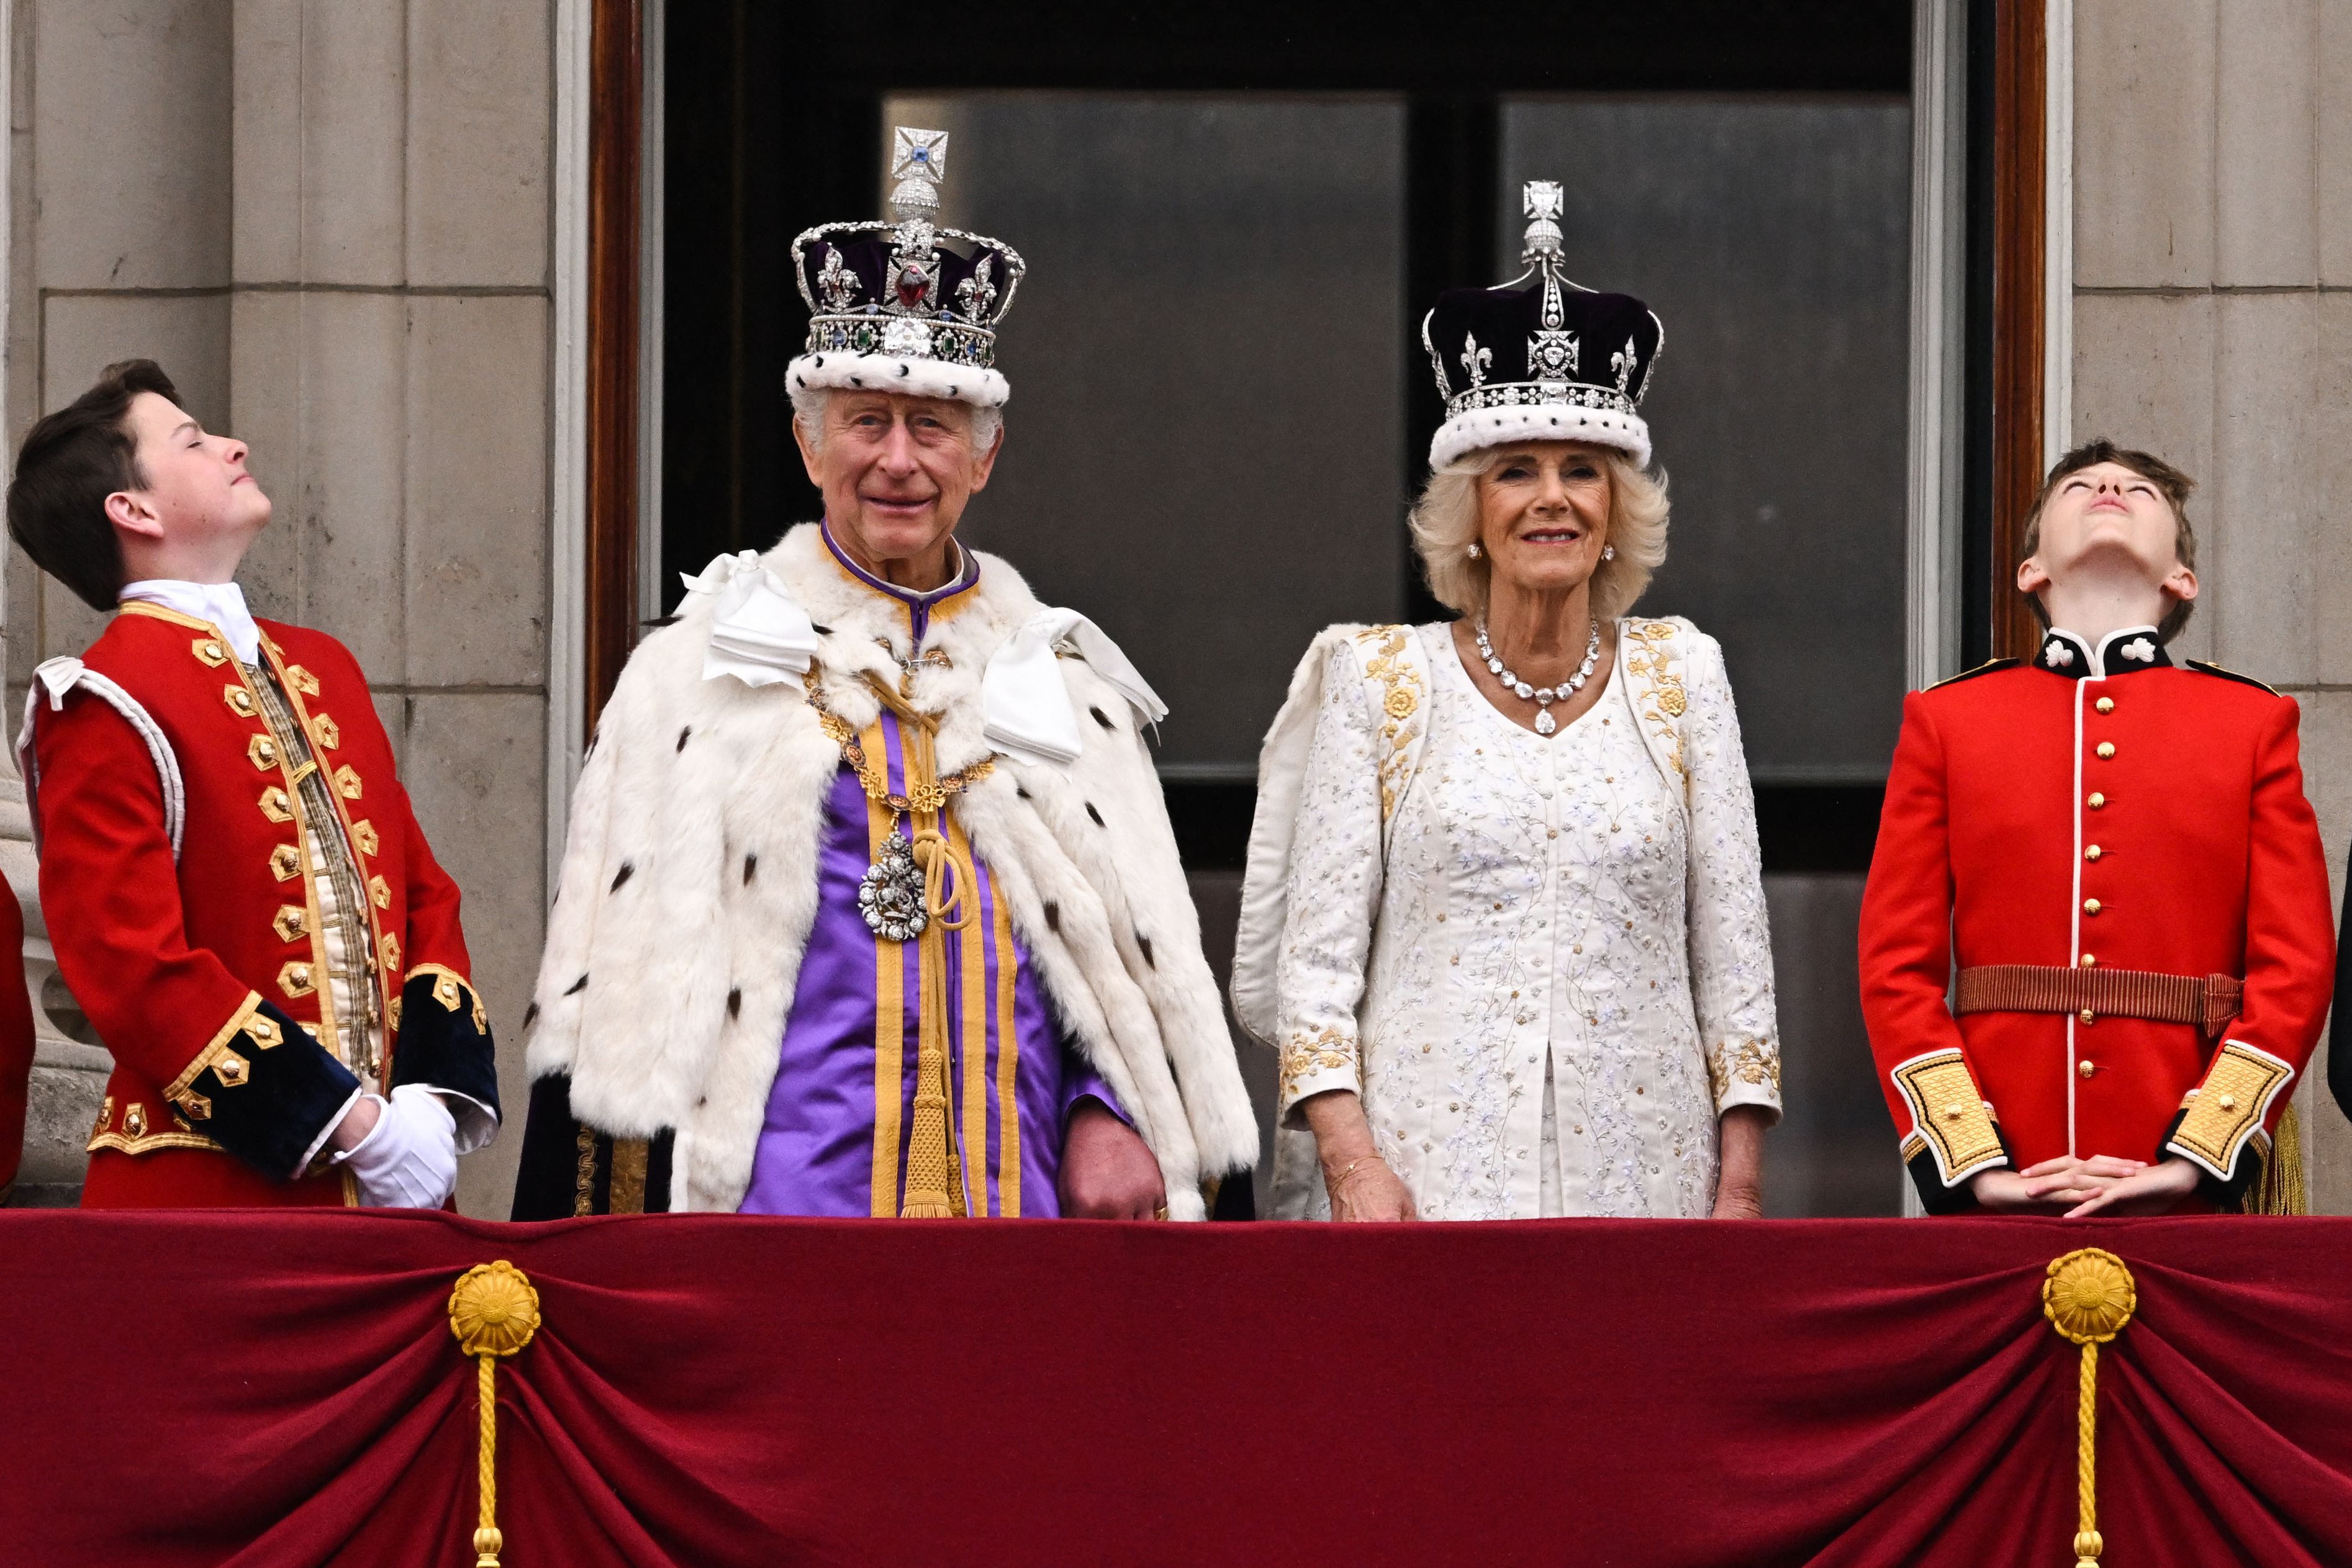 After the coronation, King Charles Swaim and Queen Camilla took to the Buckingham Palace balcony to watch a Royal Air Force flypast.